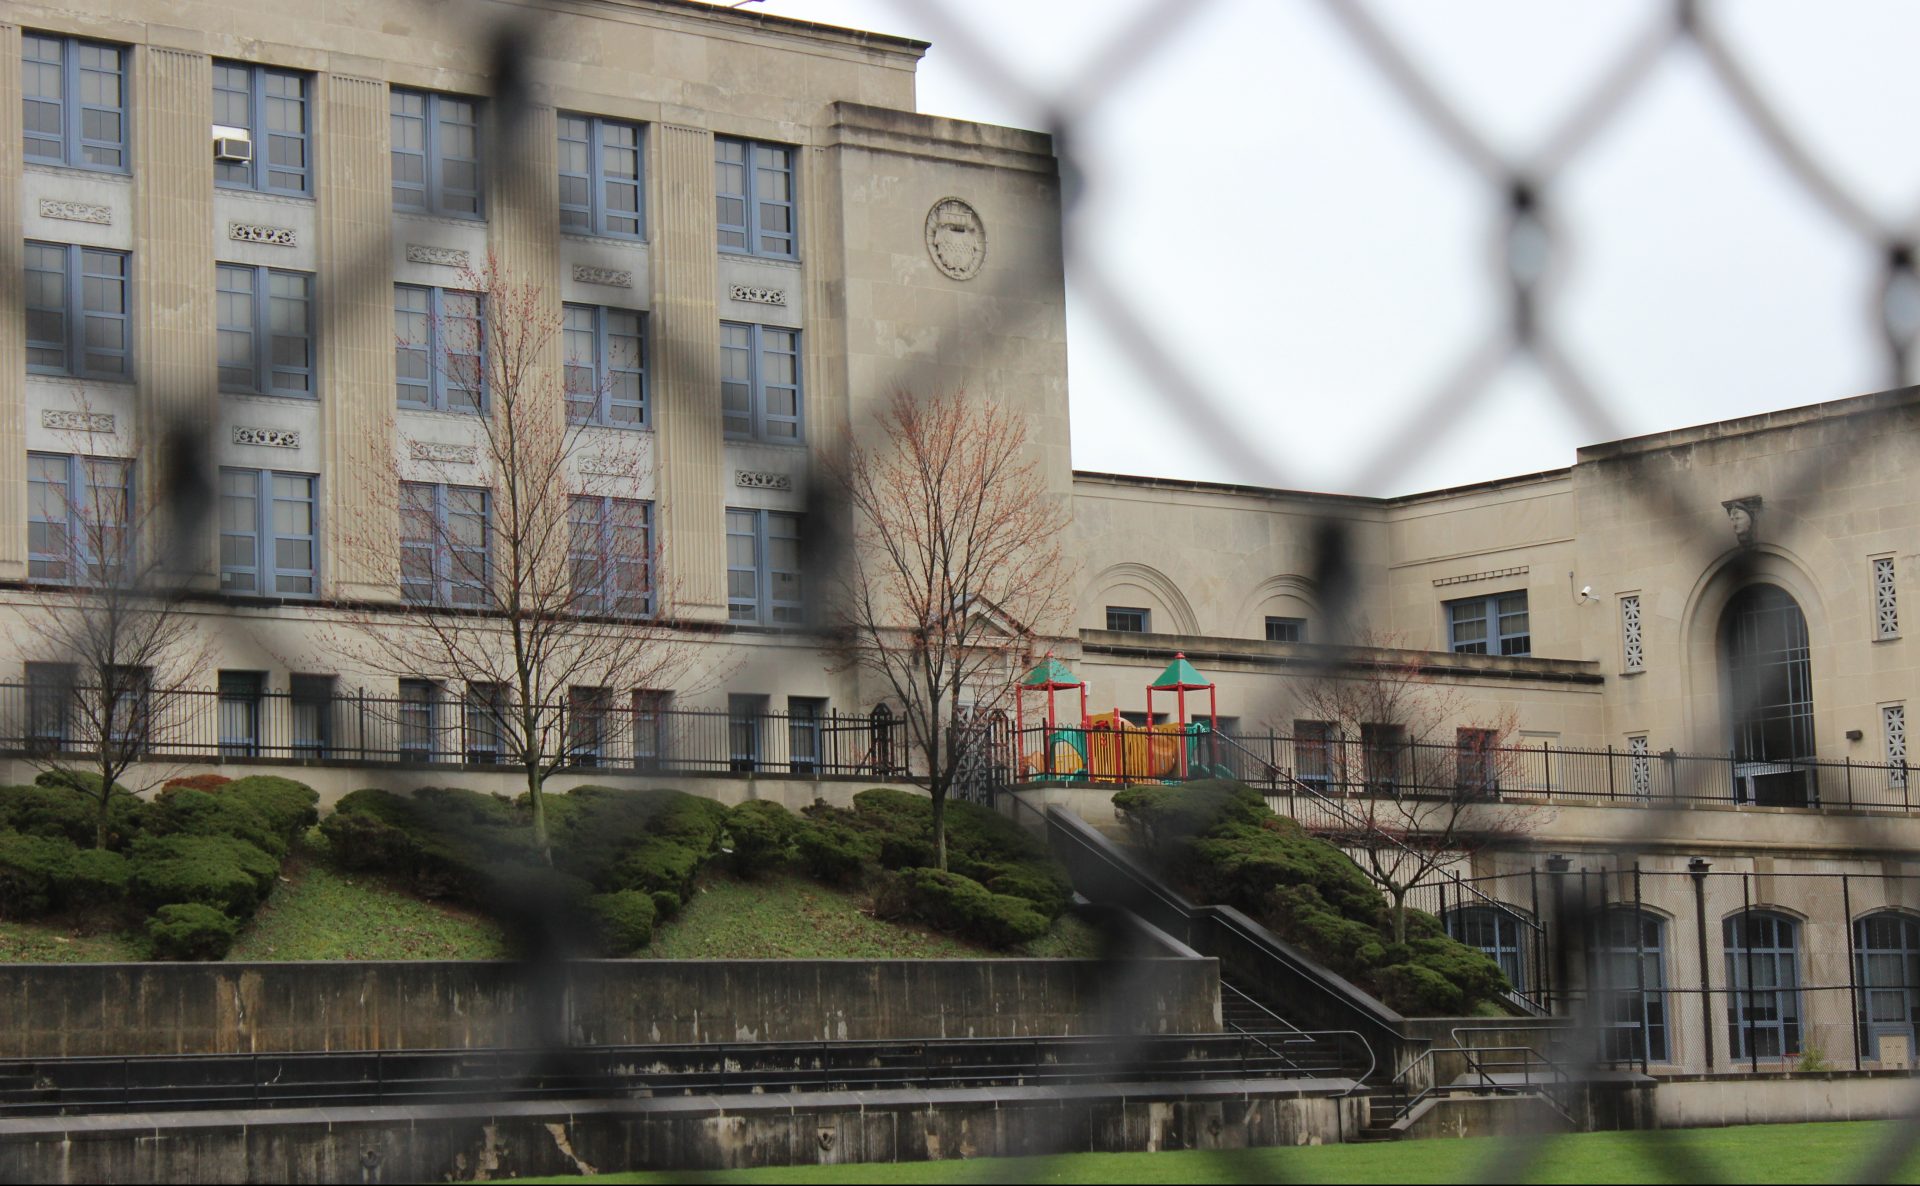 The playground of Arsenal Elementary and Middle School sits empty in Pittsburgh’s Lawrenceville neighborhood.